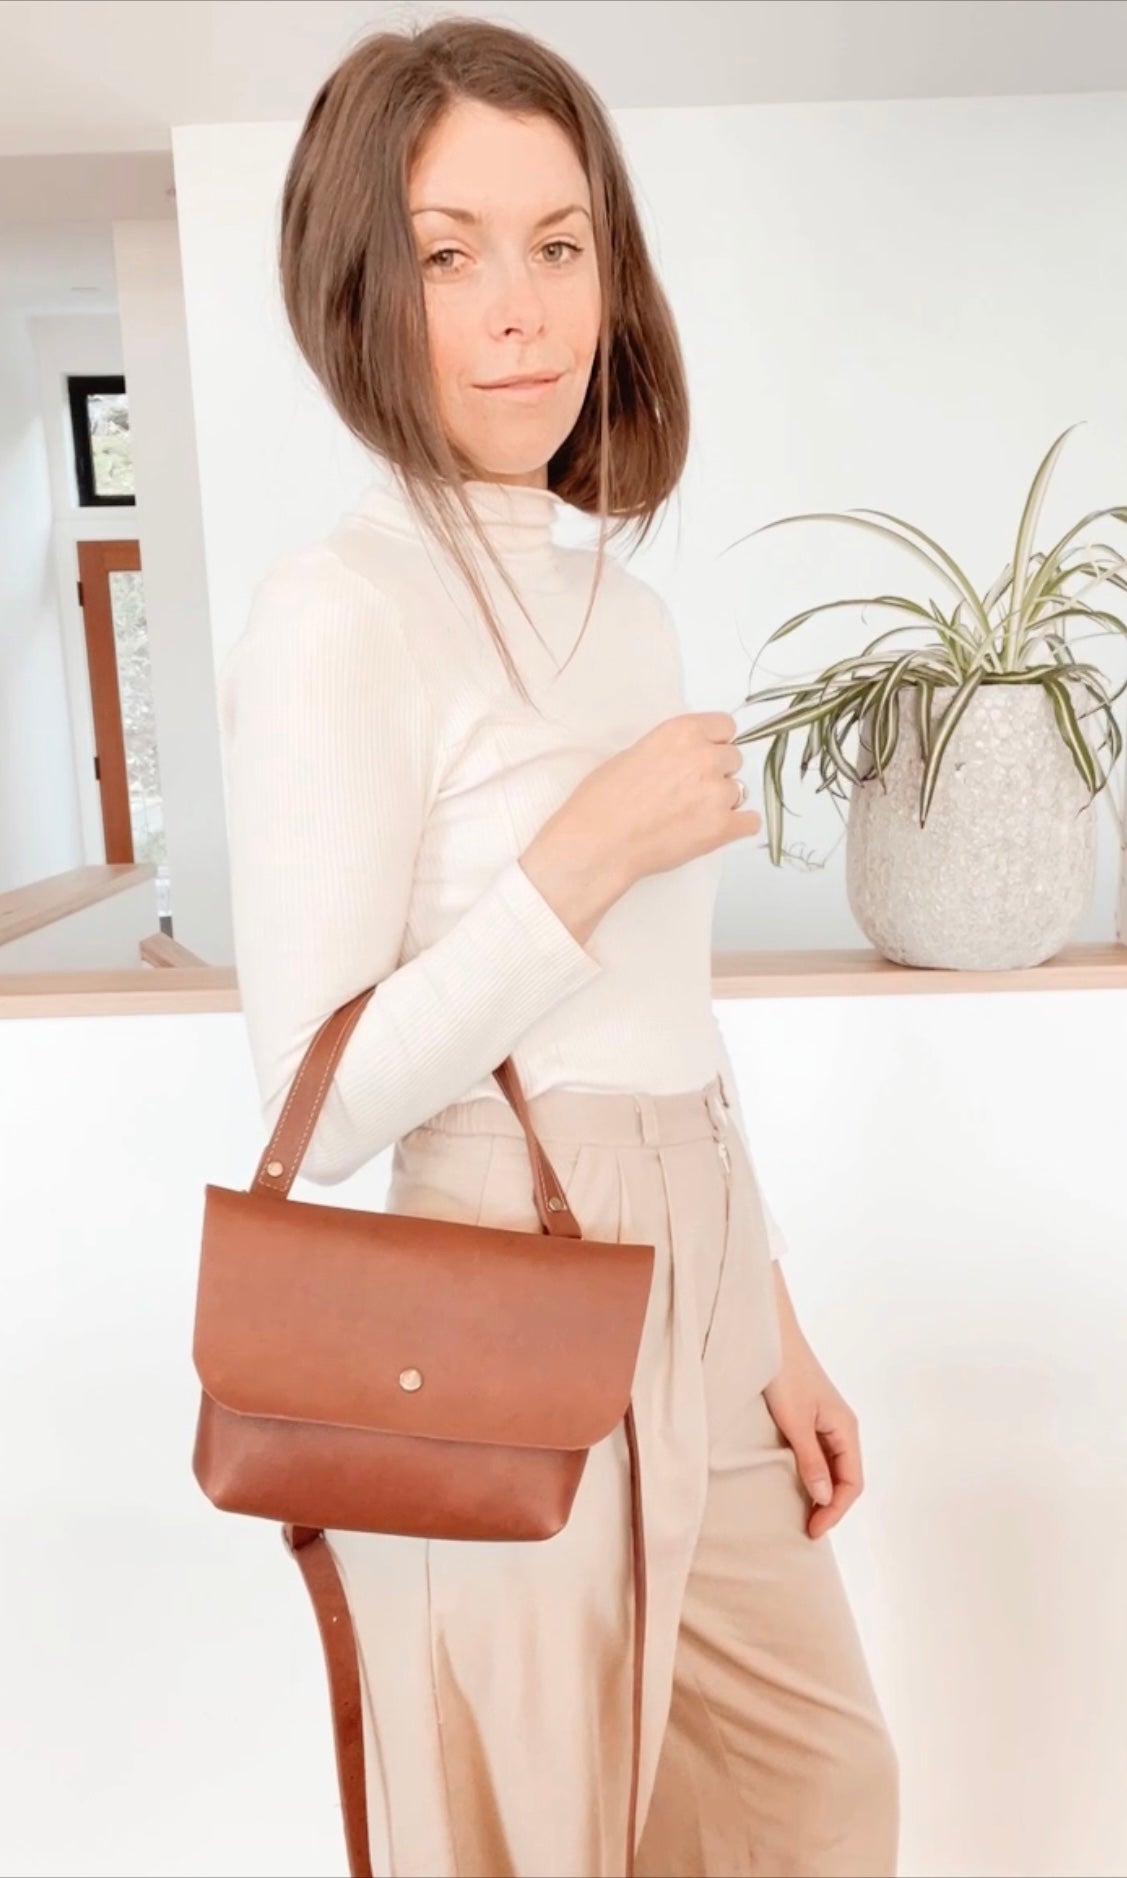 June Bag in Brown Leather Bag - handcrafted by Market Canvas Leather in Tofino, BC, Canada